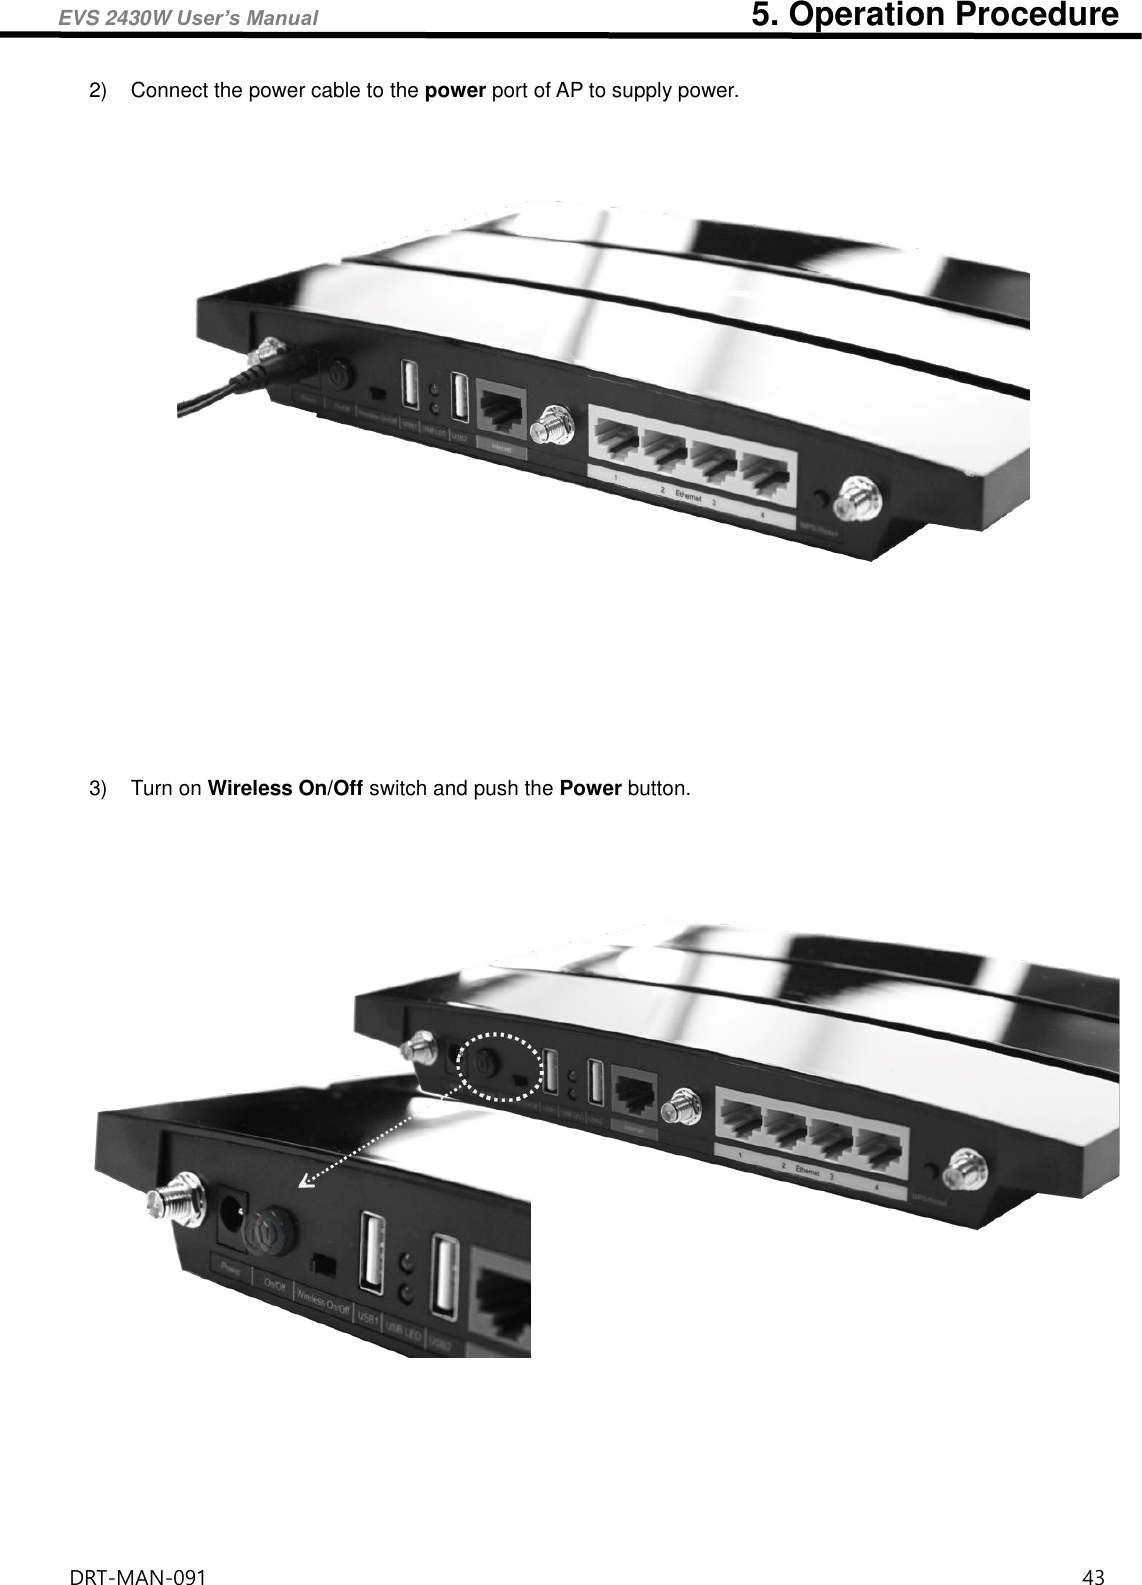 EVS 2430W User’s Manual                                                    5. Operation Procedure DRT-MAN-091                                                                                    43   2)  Connect the power cable to the power port of AP to supply power.     3)  Turn on Wireless On/Off switch and push the Power button.       